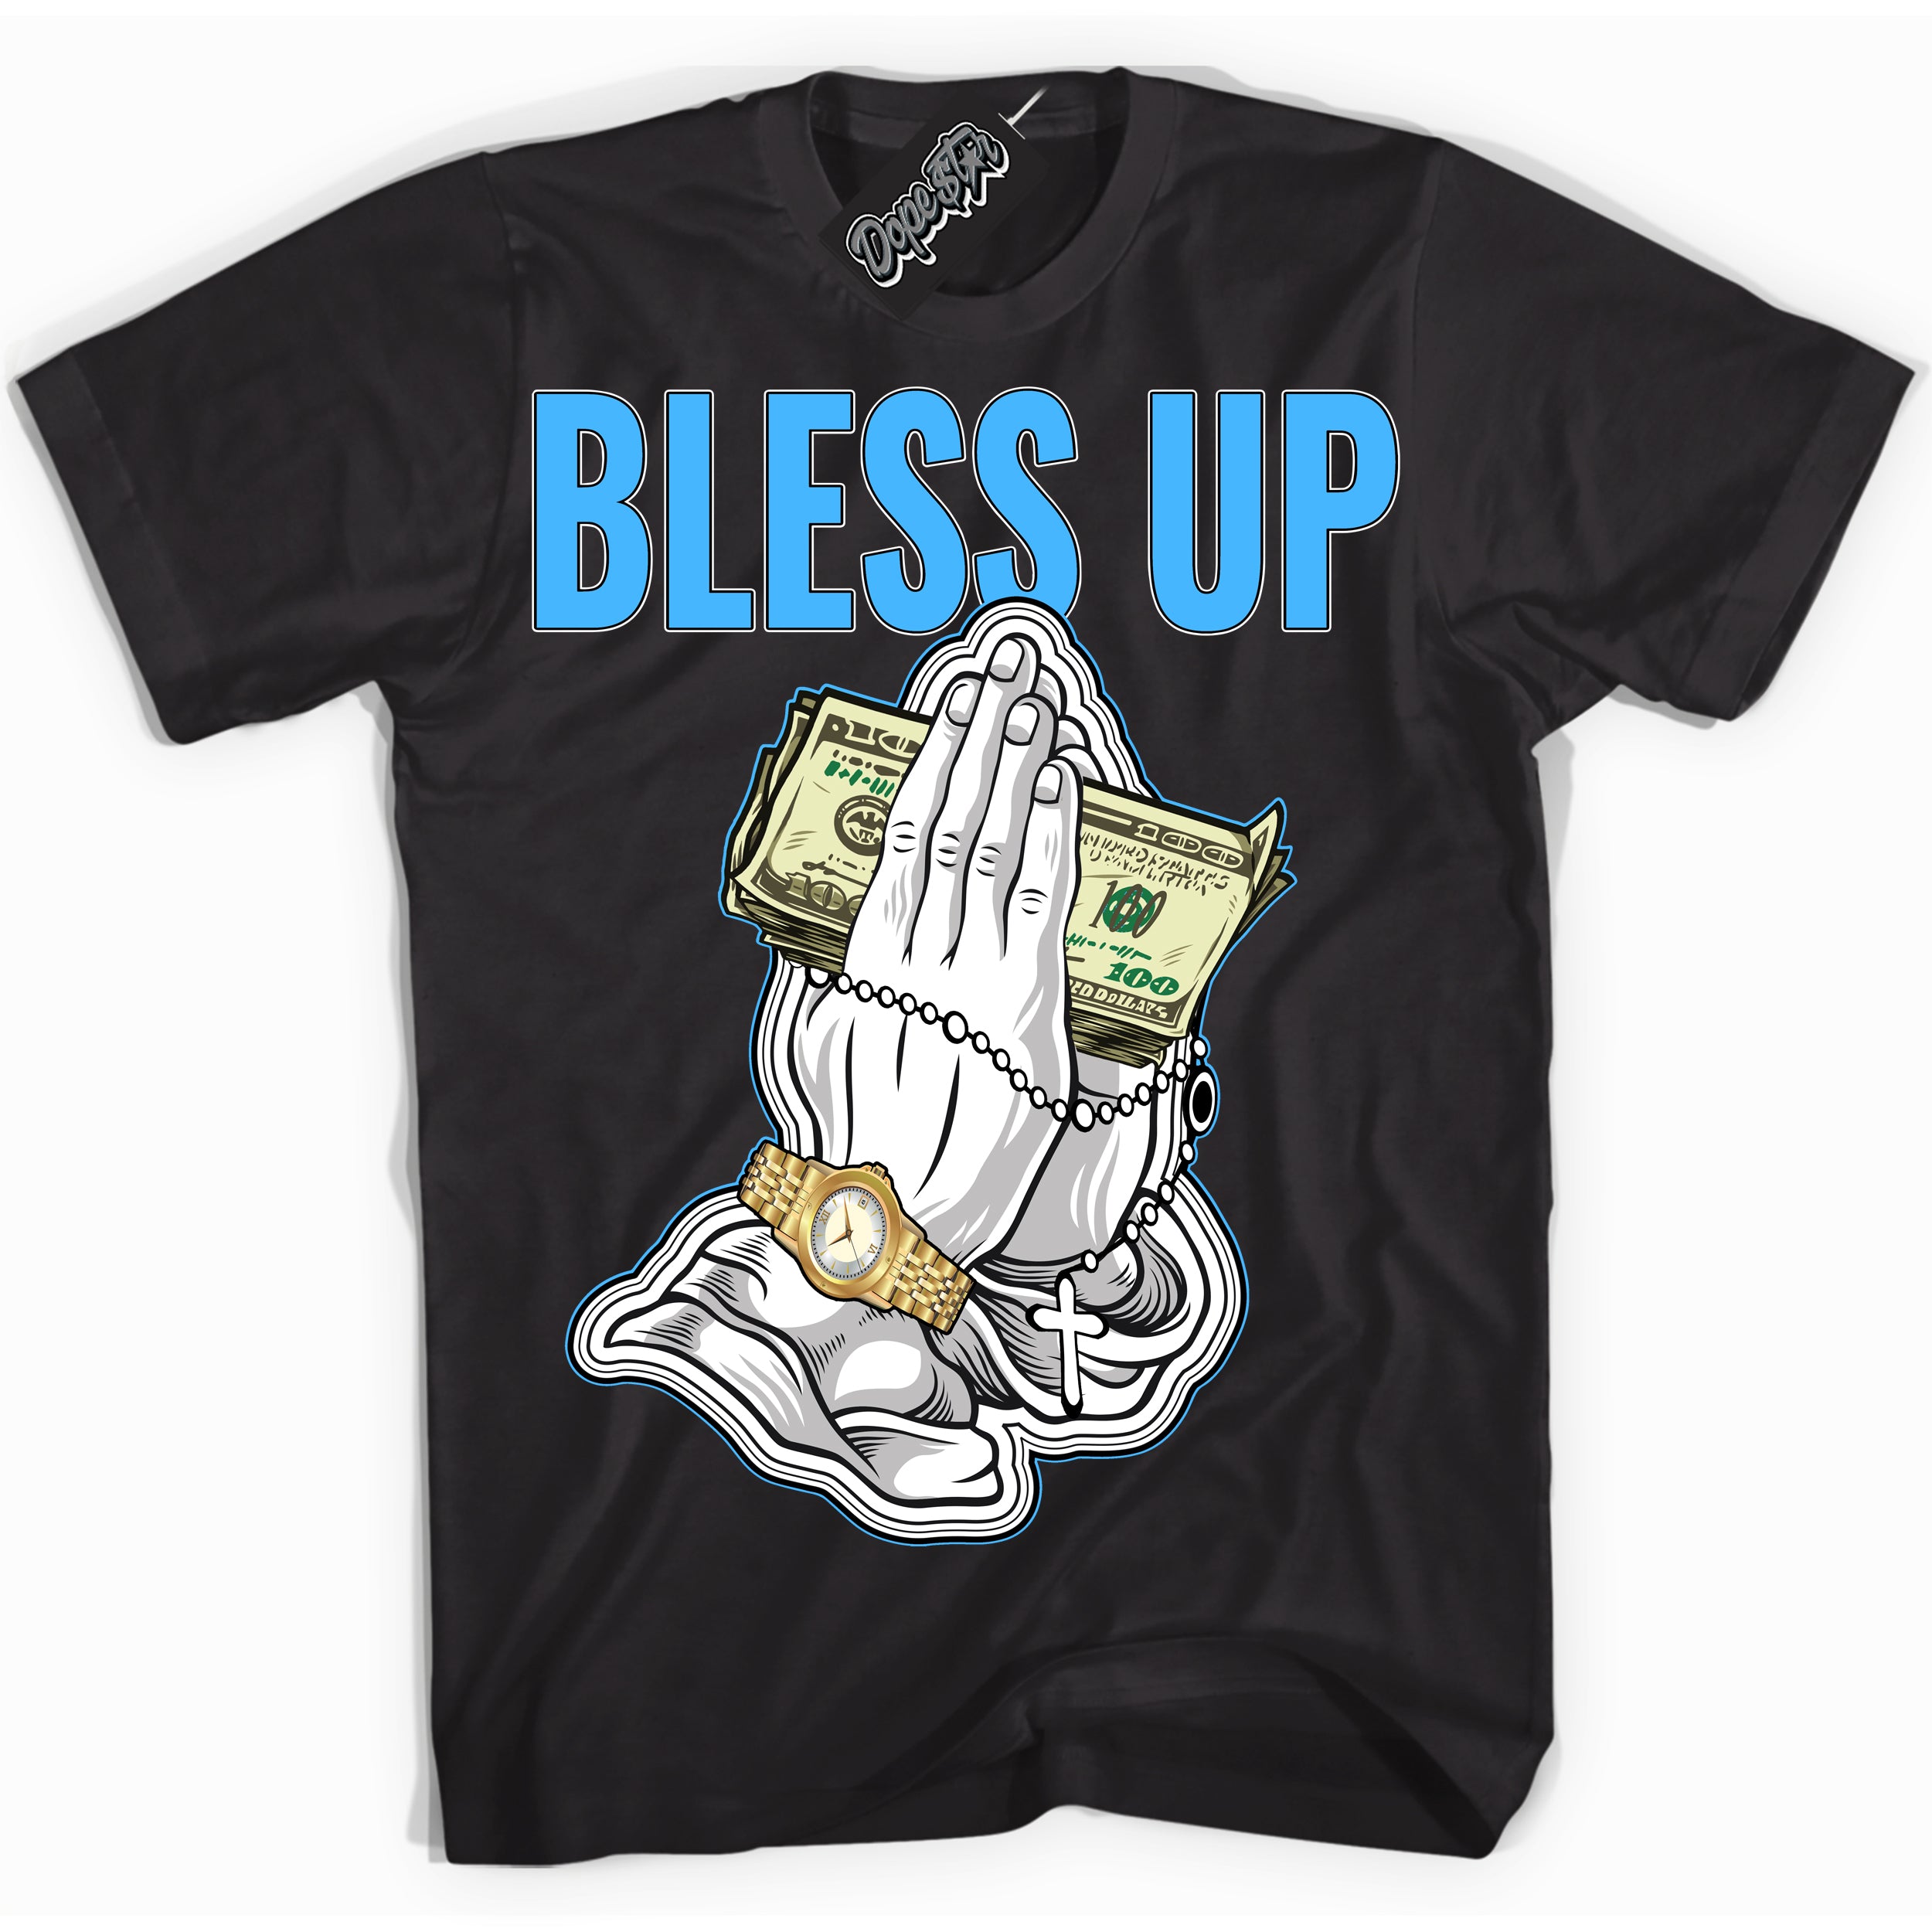 Cool Black graphic tee with “ Bless Up ” design, that perfectly matches Powder Blue 9s sneakers 